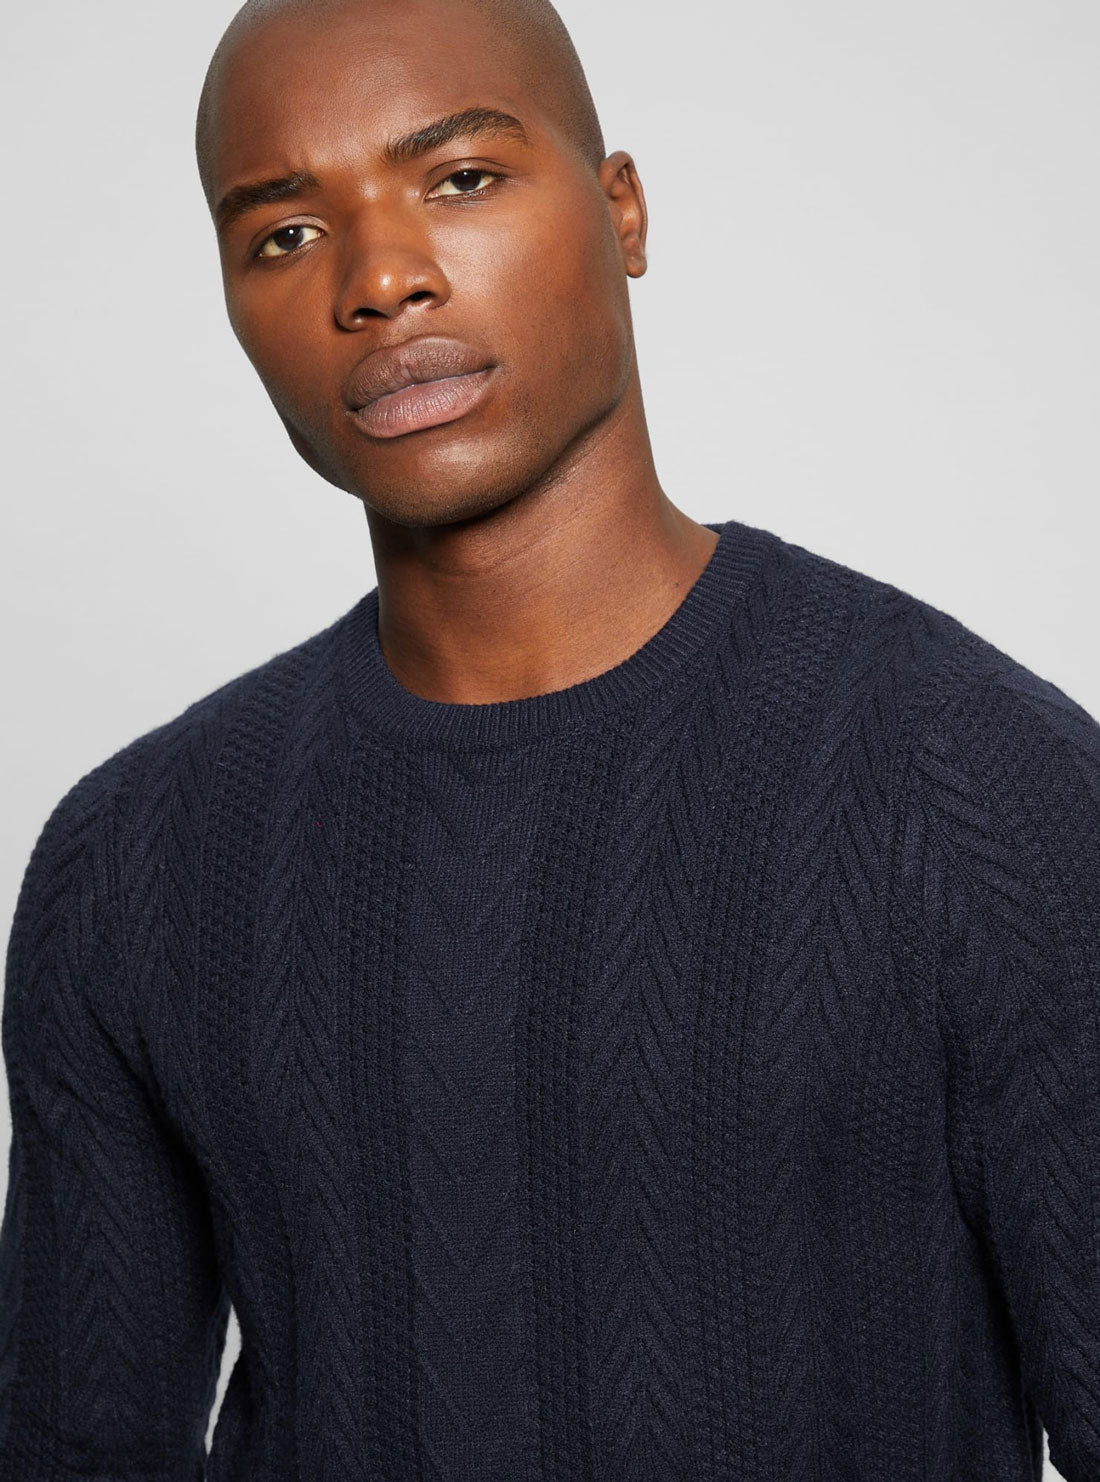 Navy Blue Cable Ethan Knit Top | GUESS Men's Apparel | detail view